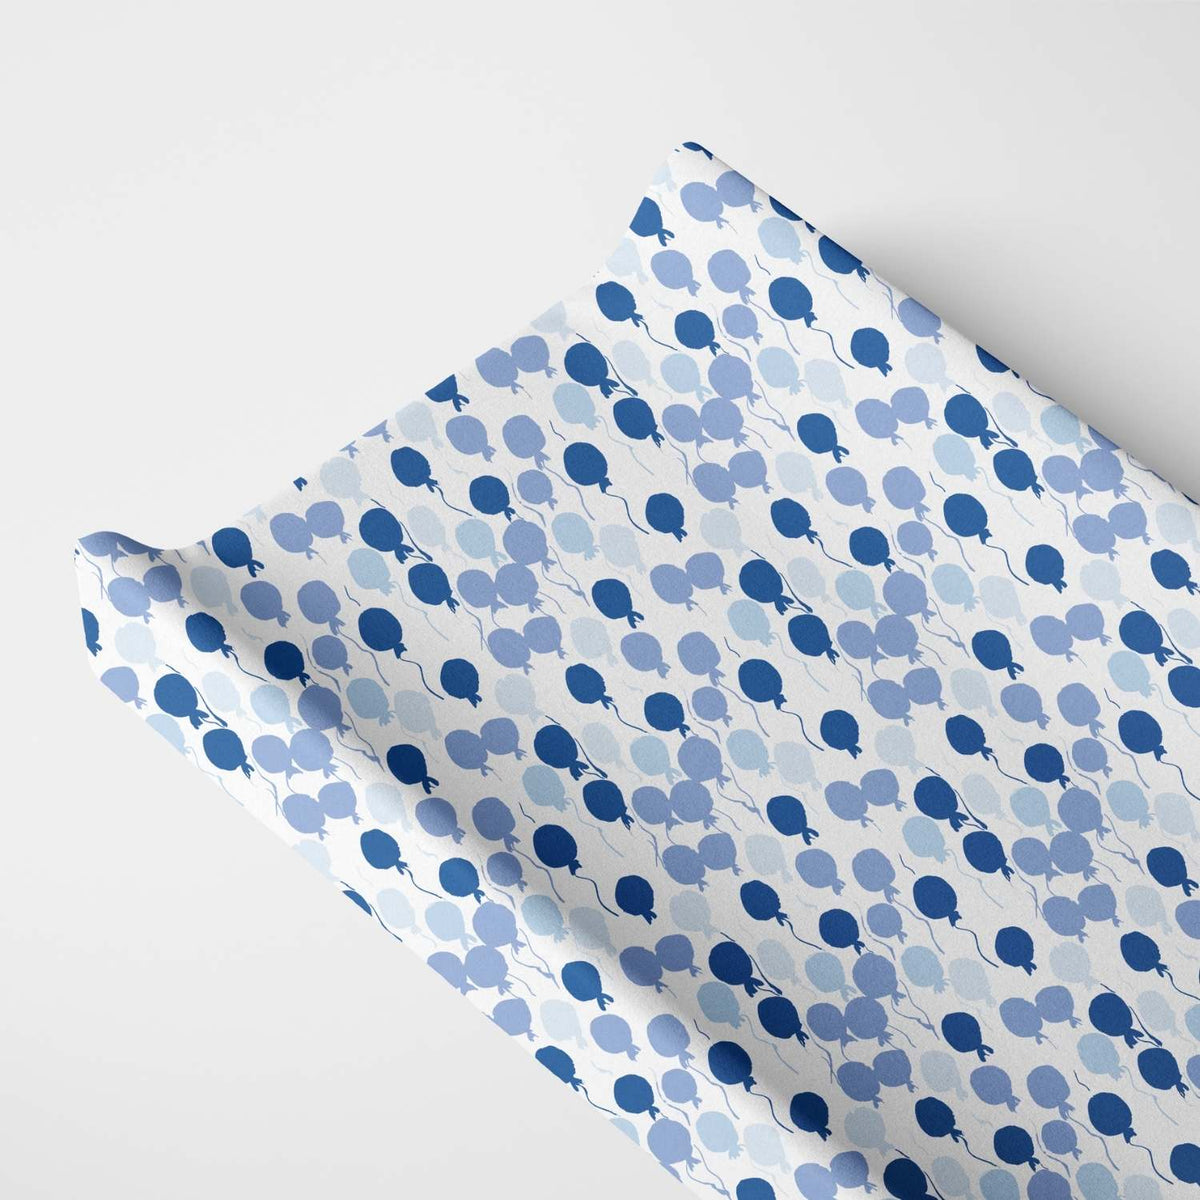 Norani Baby Changing Pad Cover in Blue Balloons